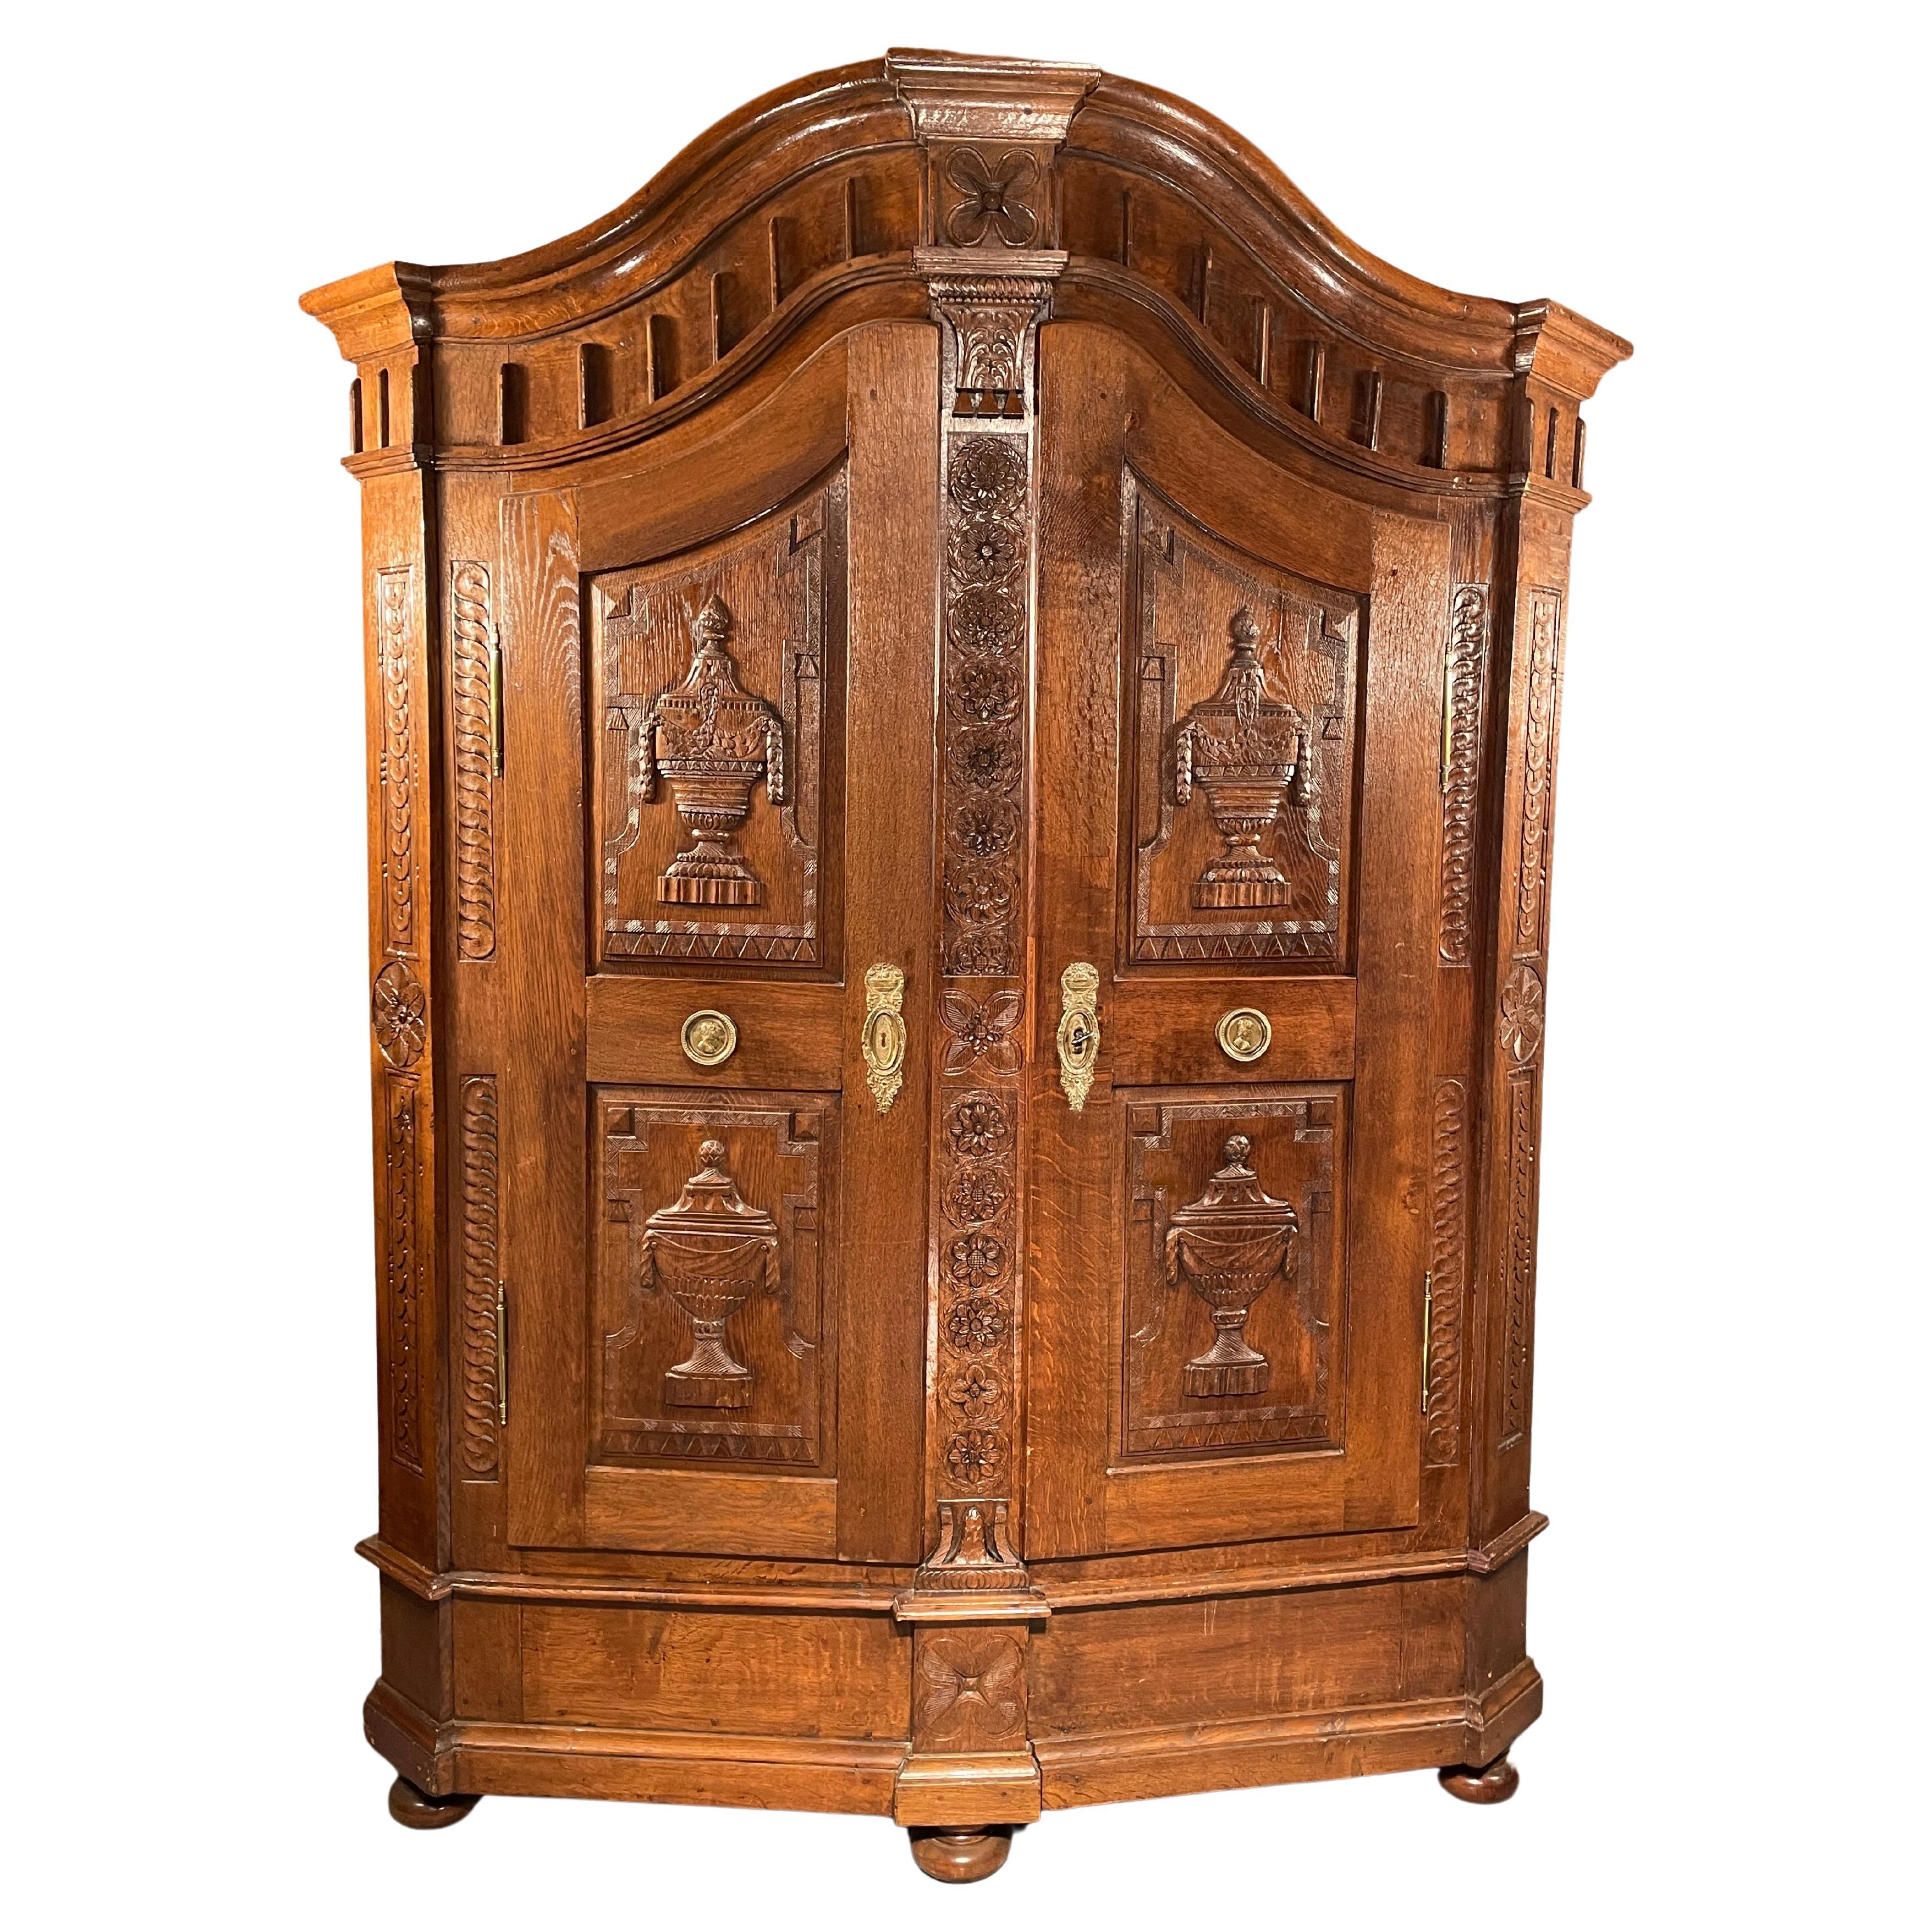 Discover the allure of a one-of-a-kind 18th century Louis XVI Armoire originating from the scenic Lake Constance region in Germany. Dating back to 1780, this armoire boasts a unique charm that transcends time. Distinguished by its captivating